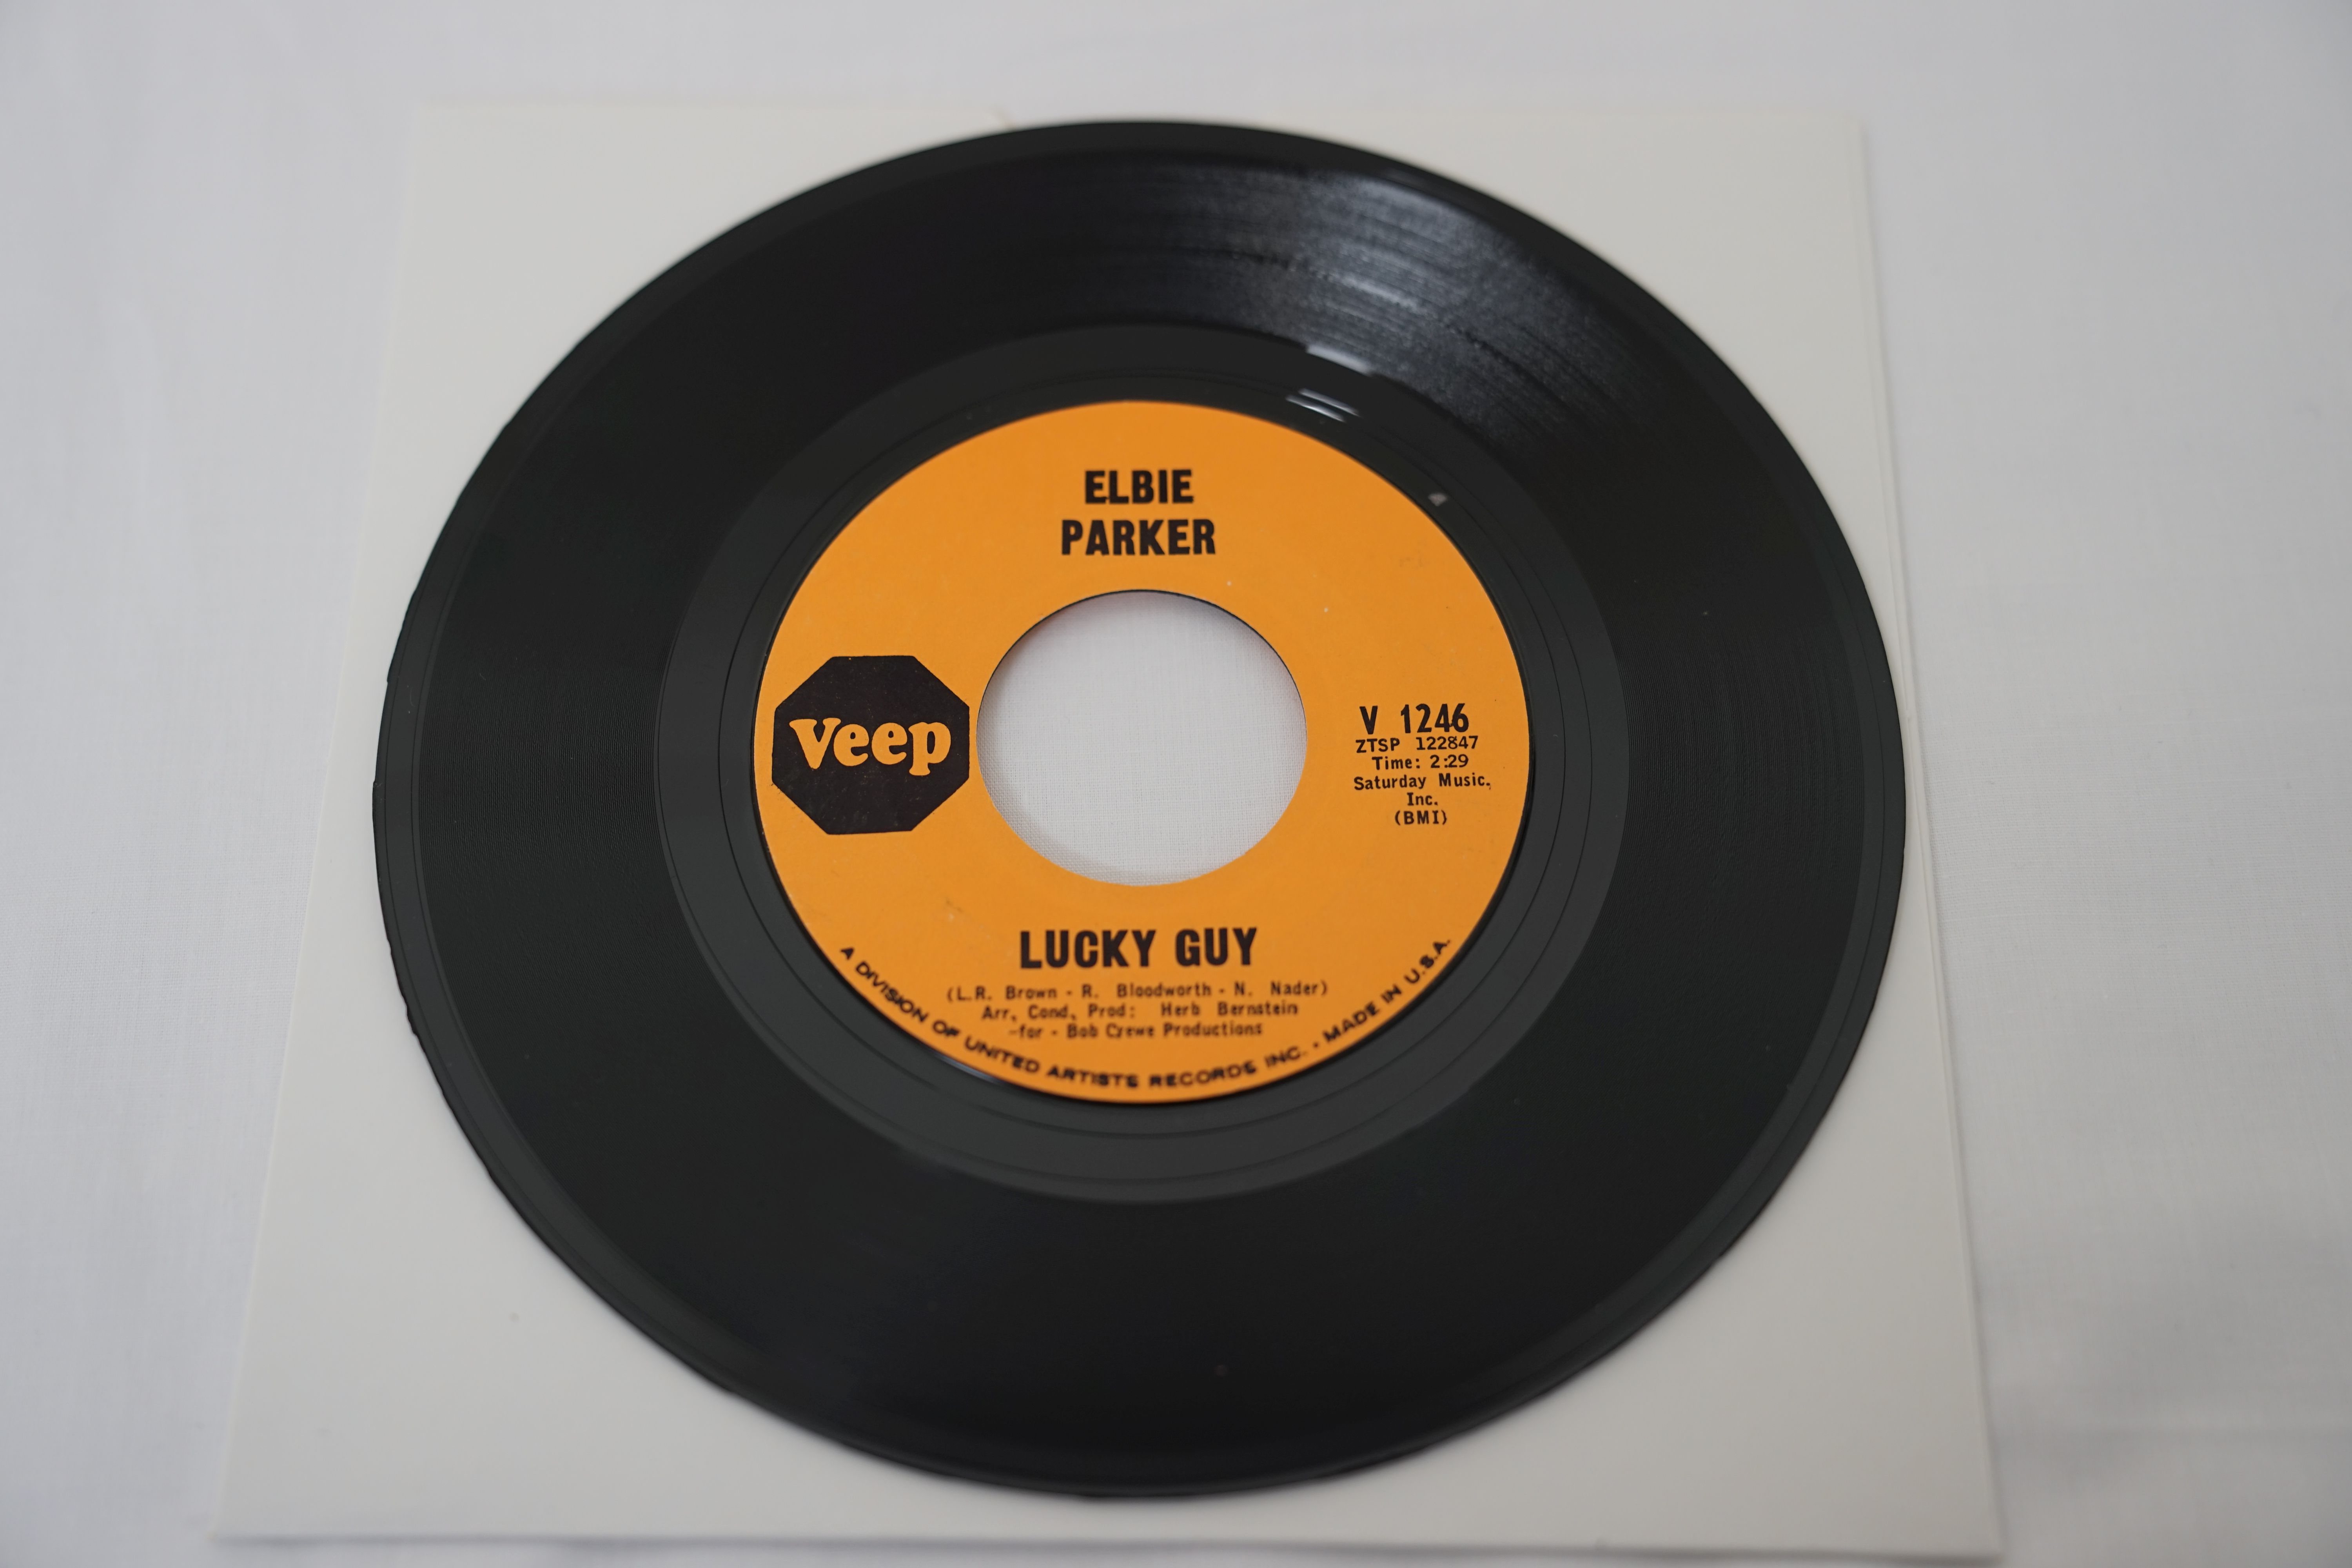 Vinyl - Elbie Parker - Please Keep Away From Me (Veep Records V 1246) EX+ to NM. A rare original - Image 3 of 4